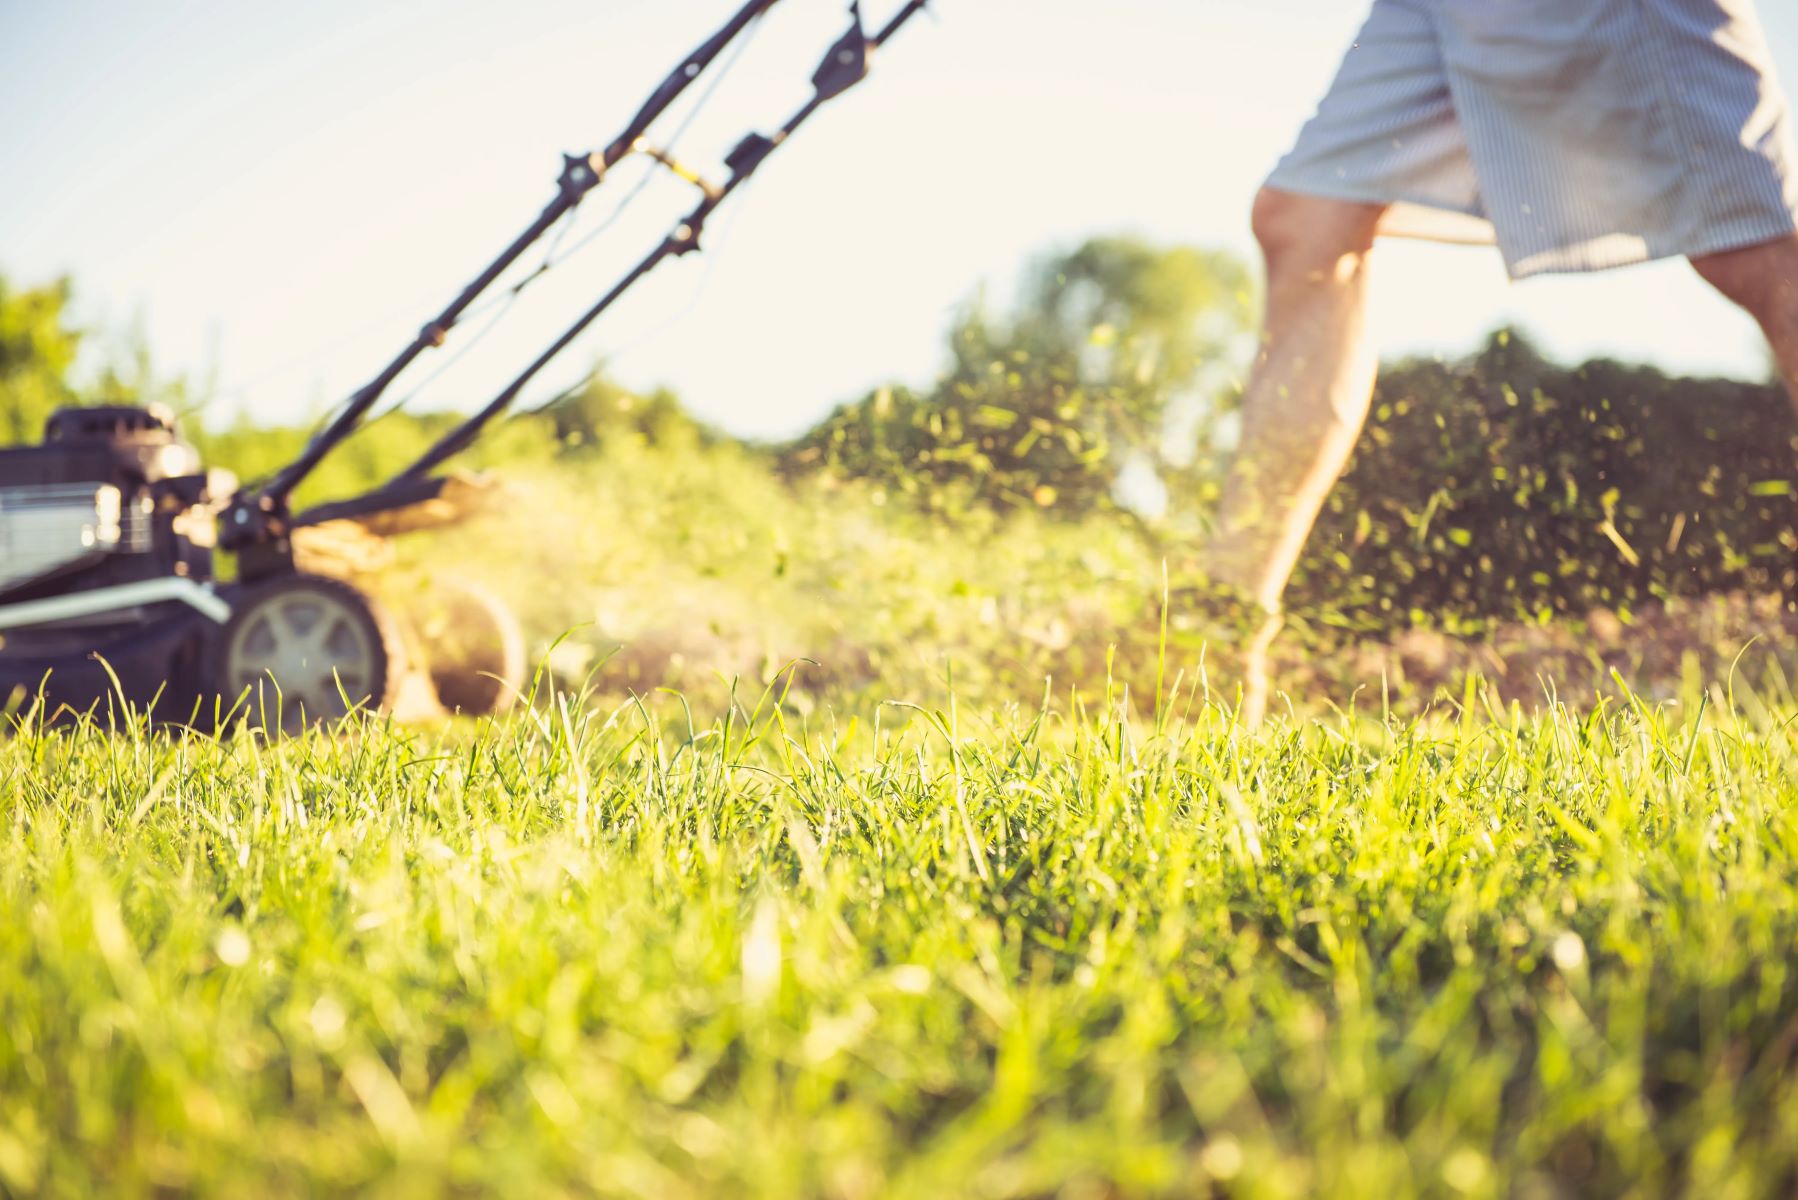 The Surprising Secret To Perfectly Mowing Your Lawn In Hot Weather Revealed!